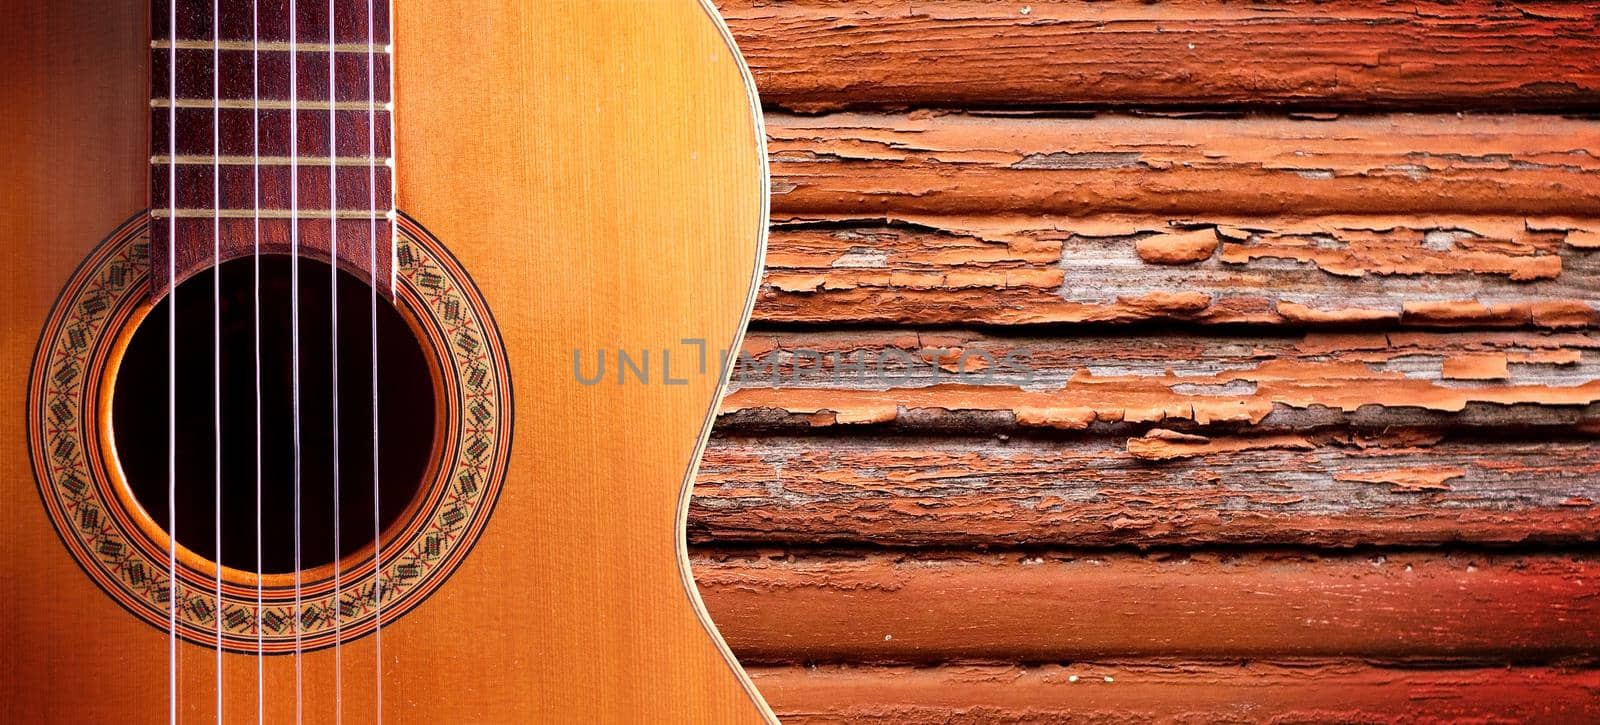 Spanish guitar and wood wall.Music background